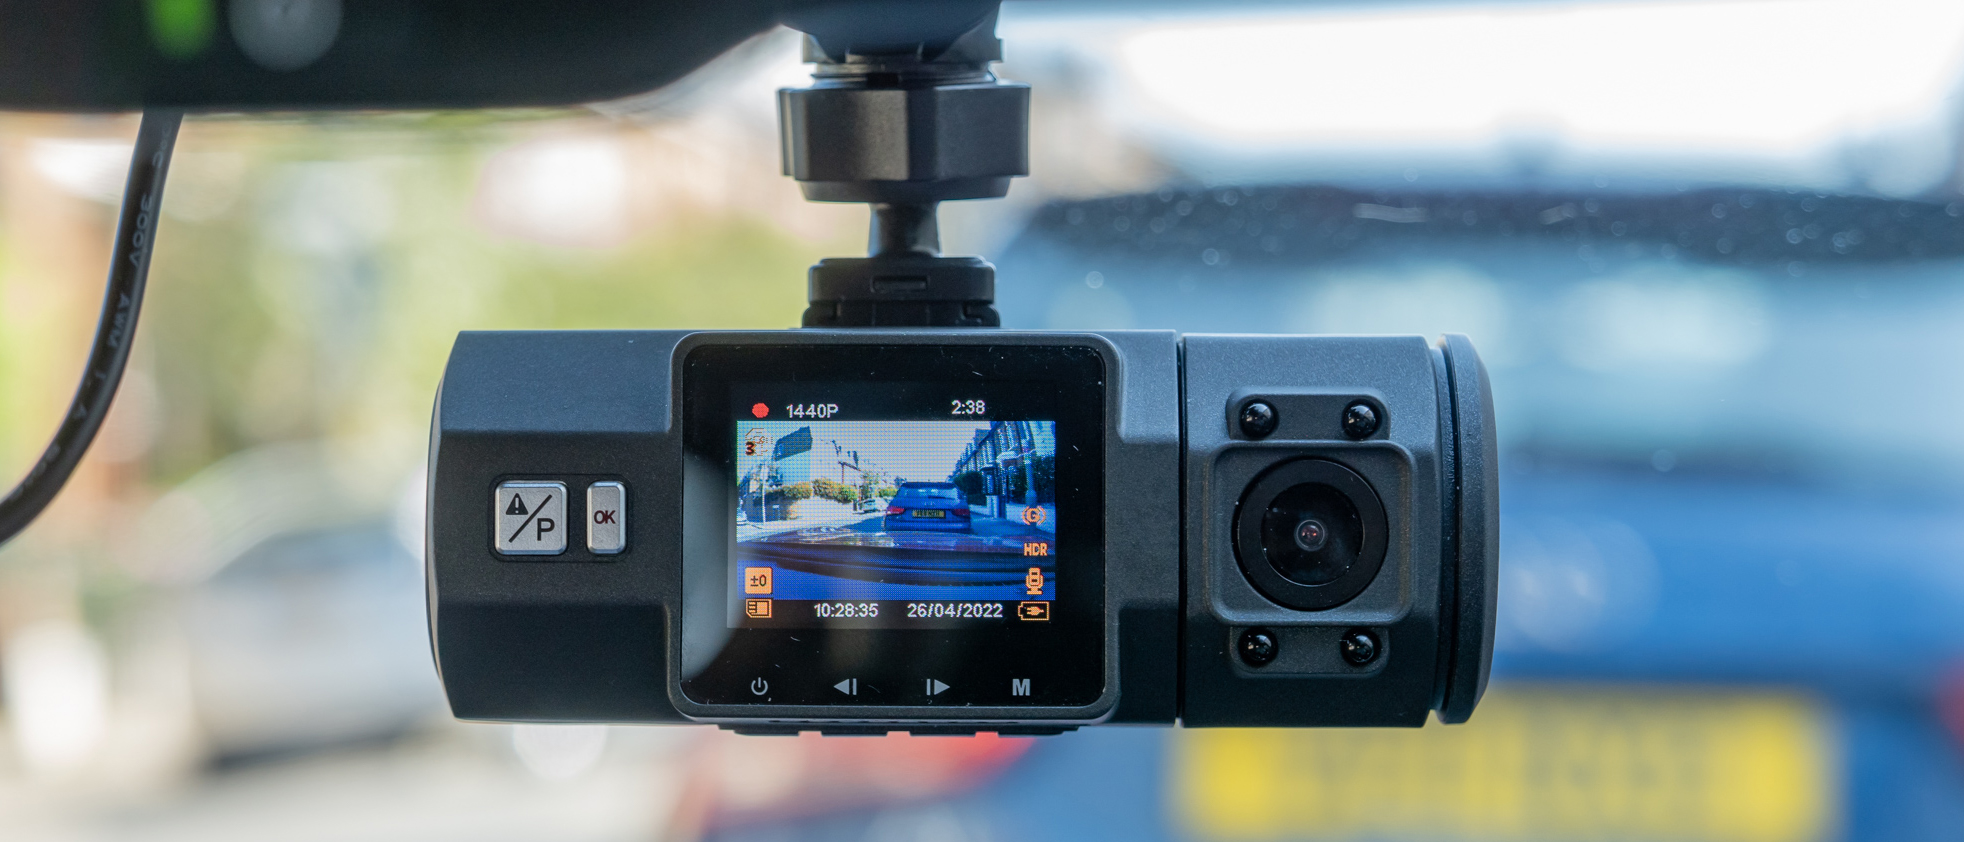 Vantrue's N2 Pro dash cam offers clear dual 1080p video day or